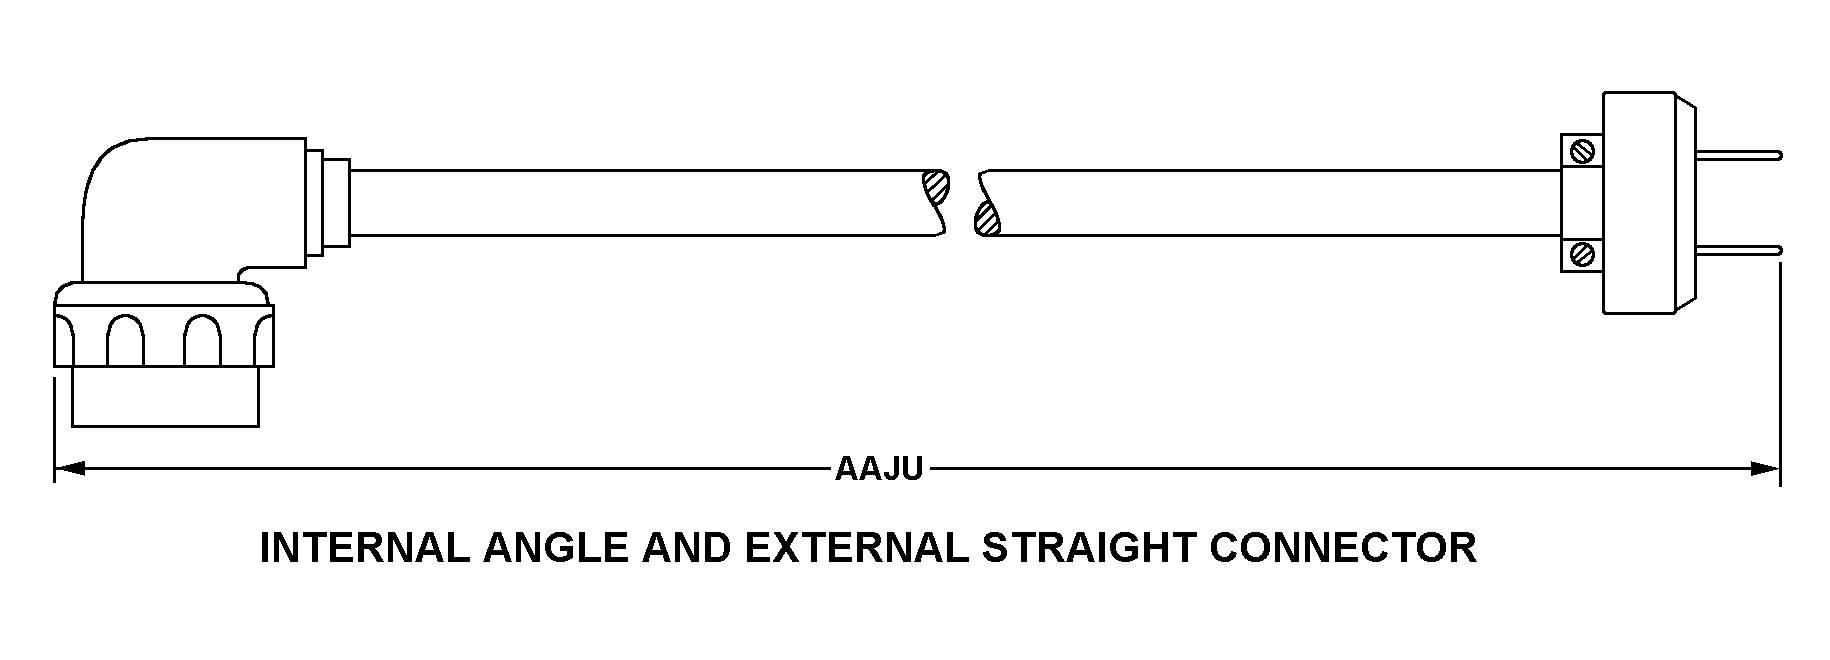 INTERNAL ANGLE AND EXTERNAL STRAIGHT CONNECTOR style nsn 5995-01-323-6913